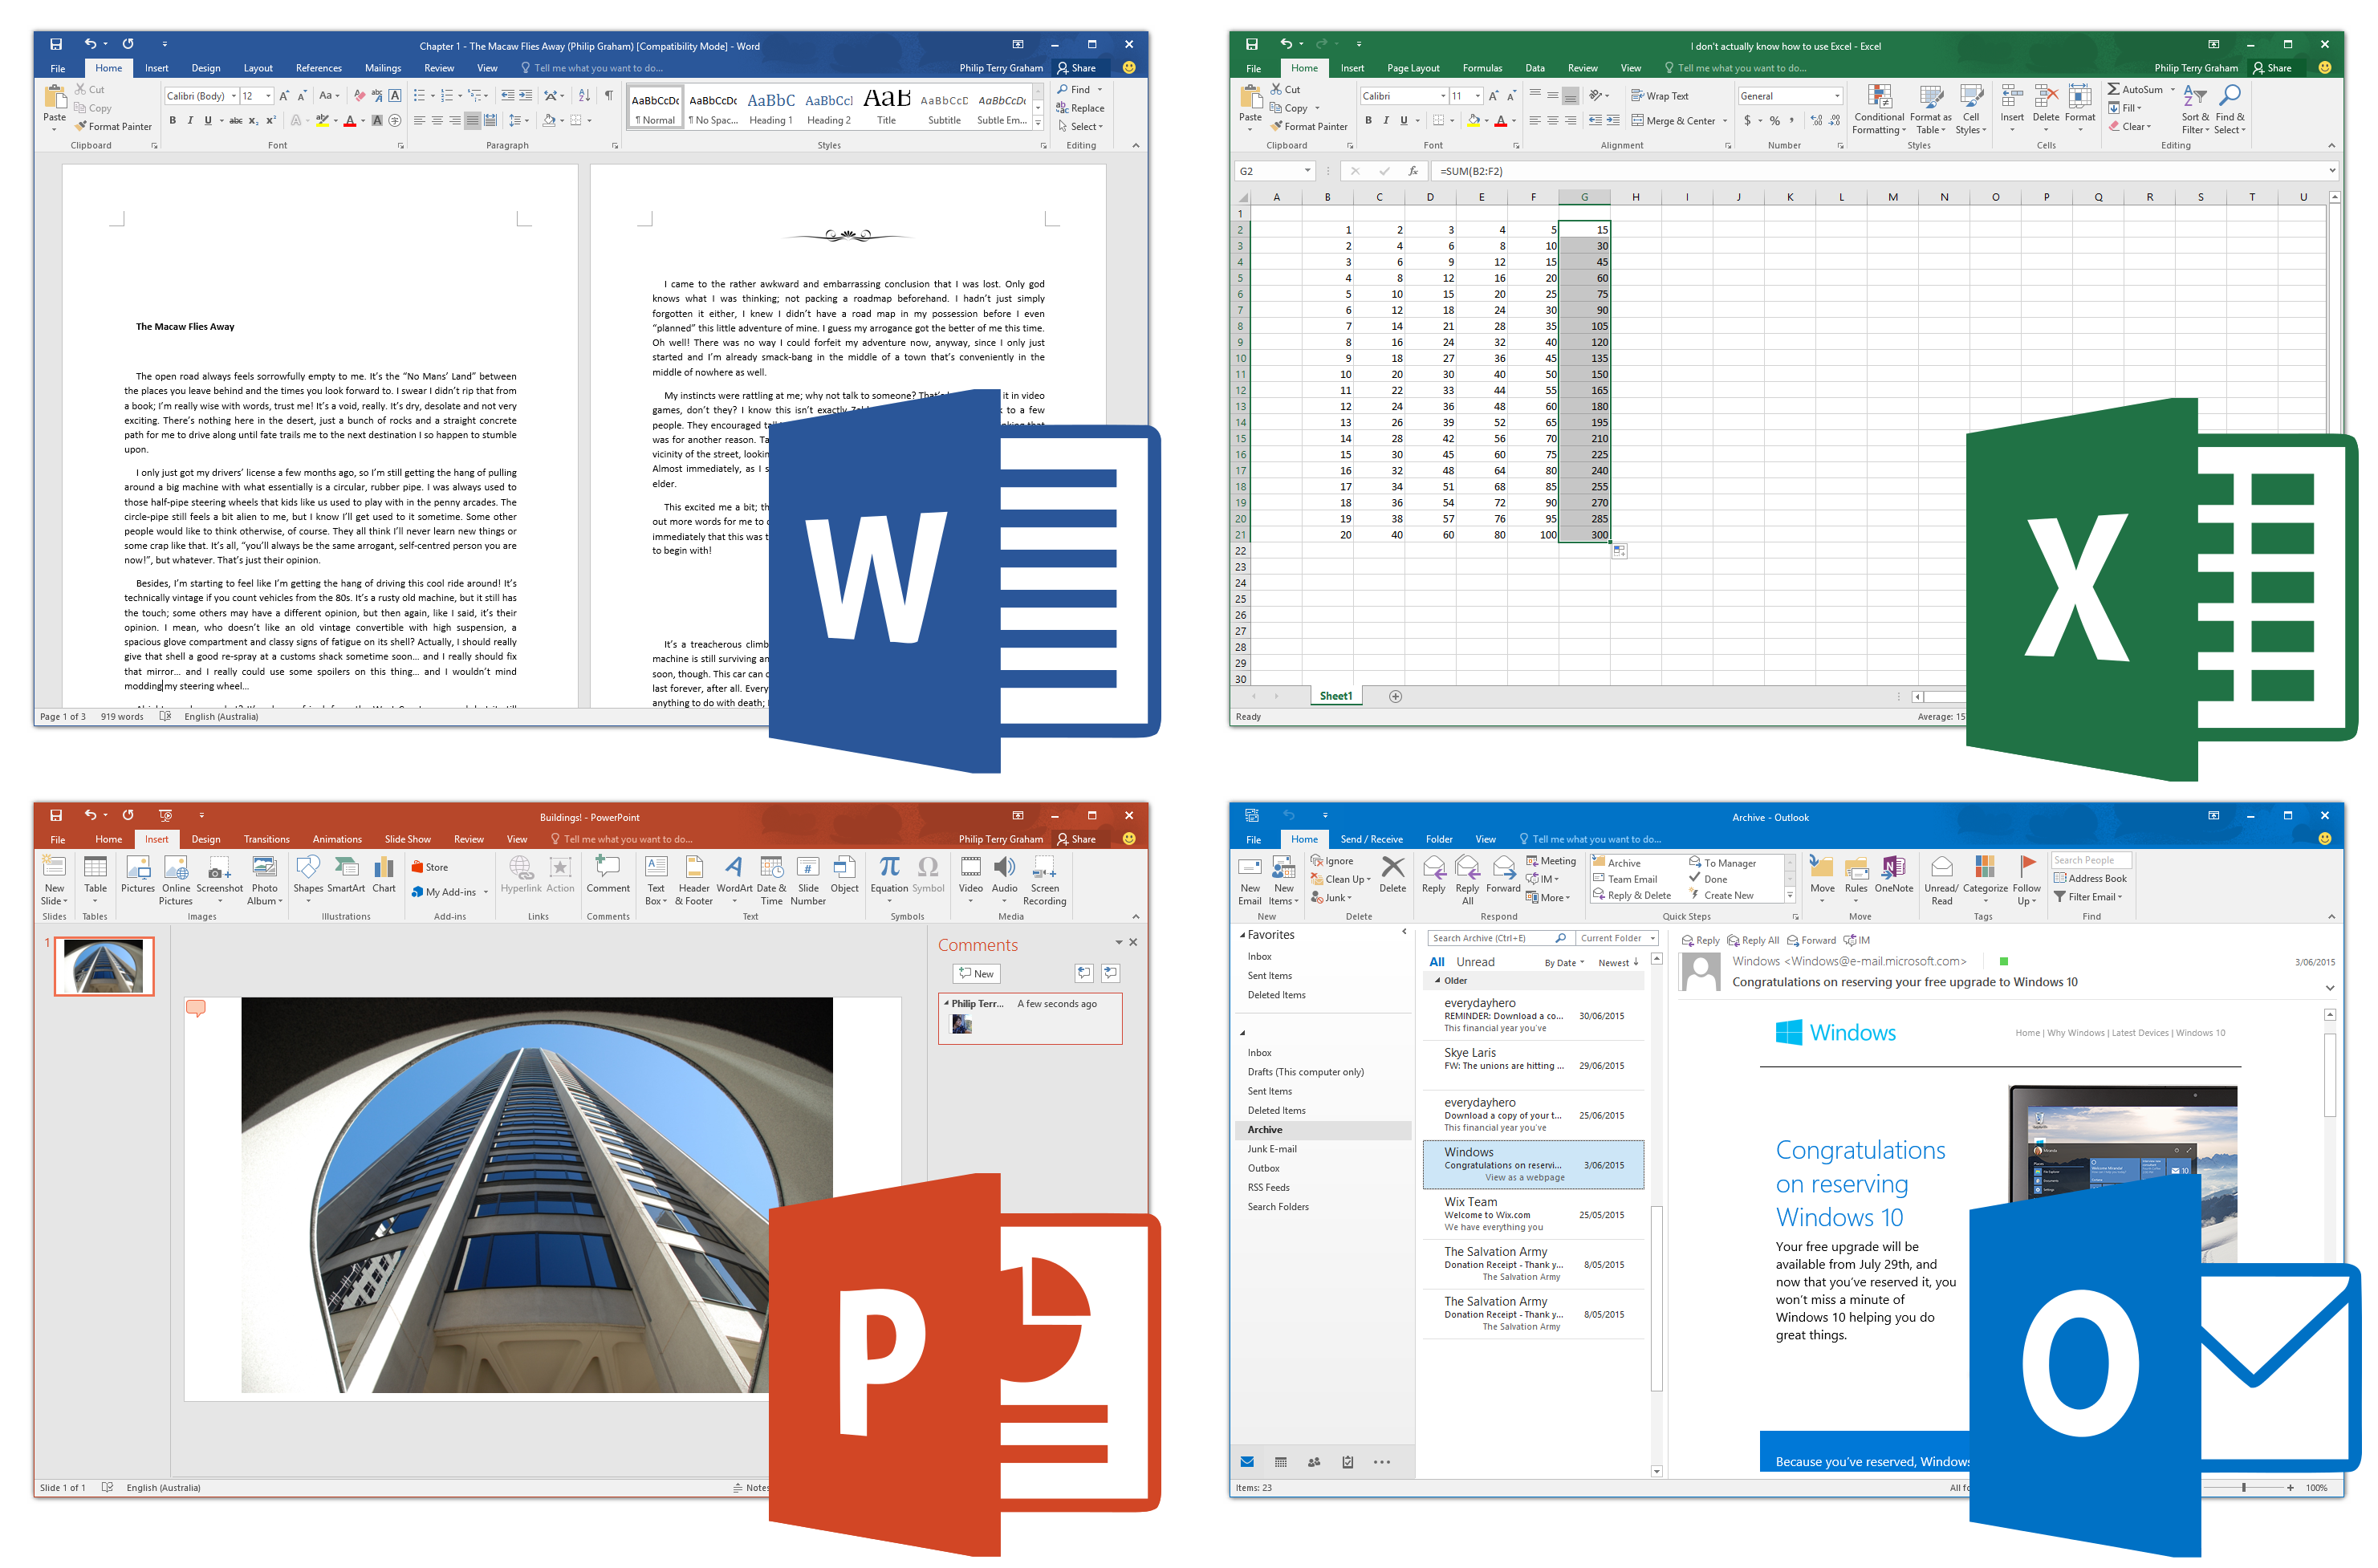 Four screenshots of Microsoft Office 2016 applications running on Windows 10, clockwise from top left: Word, Excel, Outlook and PowerPoint. The apps are being used as per their intentional uses in each of the screenshots, rather than the default starting screens, to illustrate the uses of each of the applications. Each screenshot is accompanied by each of their respective icons, shown in Windows. Used with permission from Microsoft.